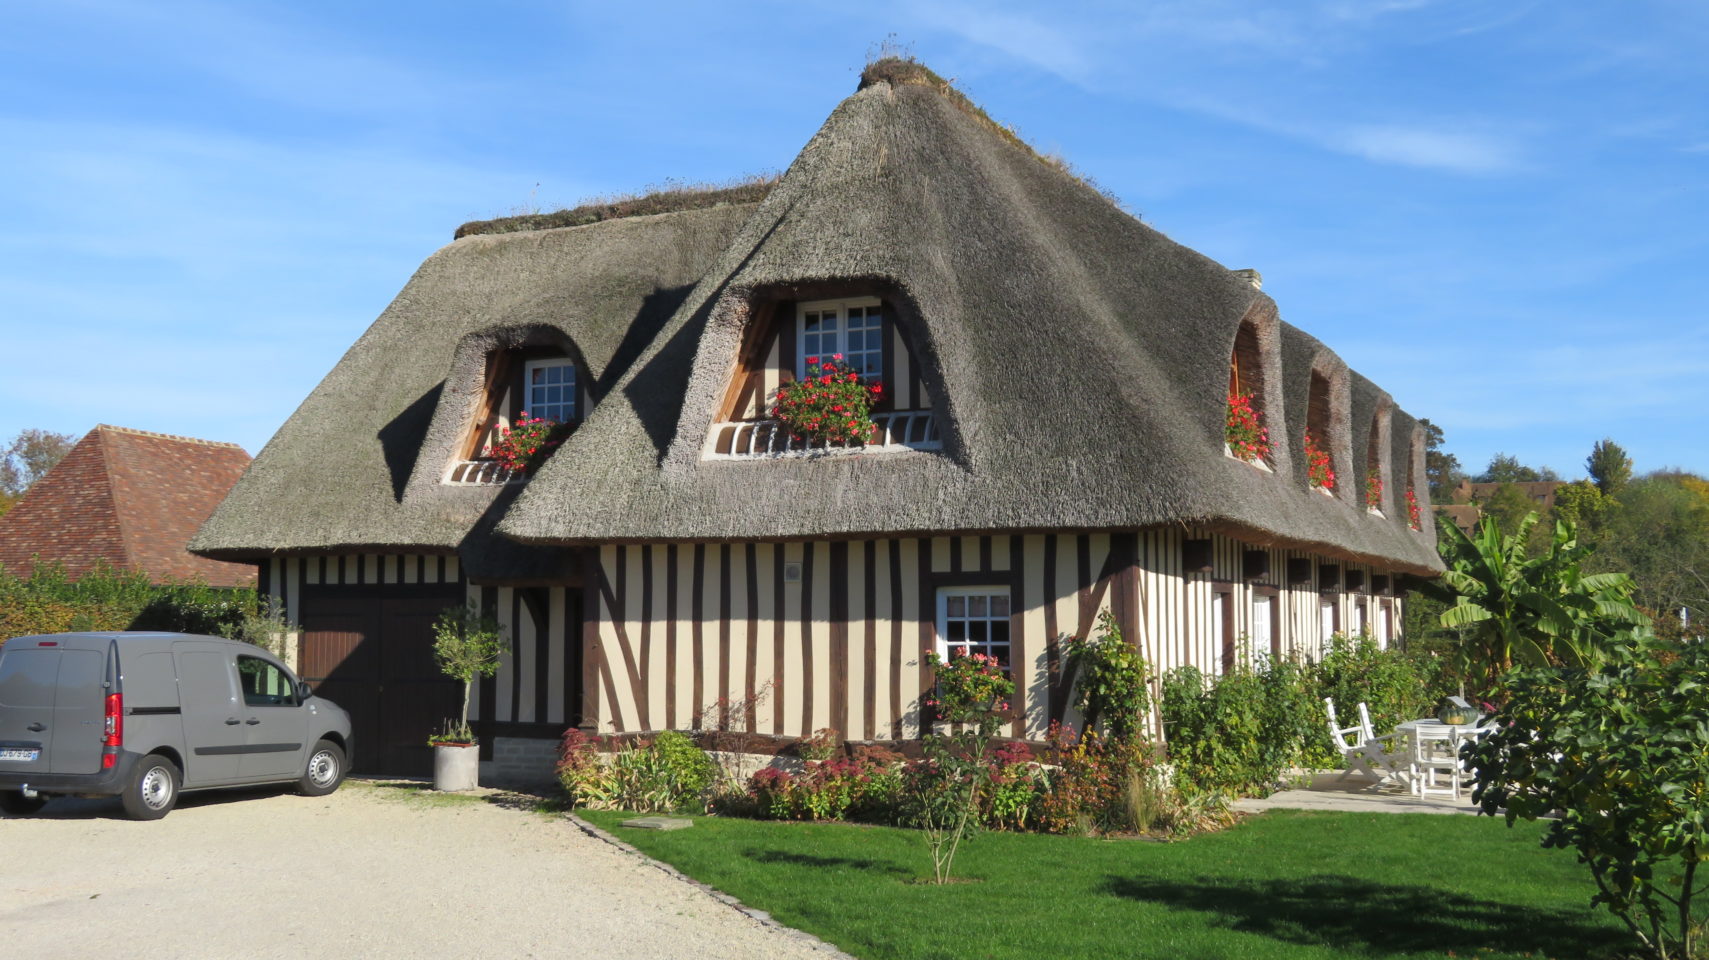 Thatched roof and half-timbered house of Normandie (Paris and Normandie AMAWaterways Cruise)